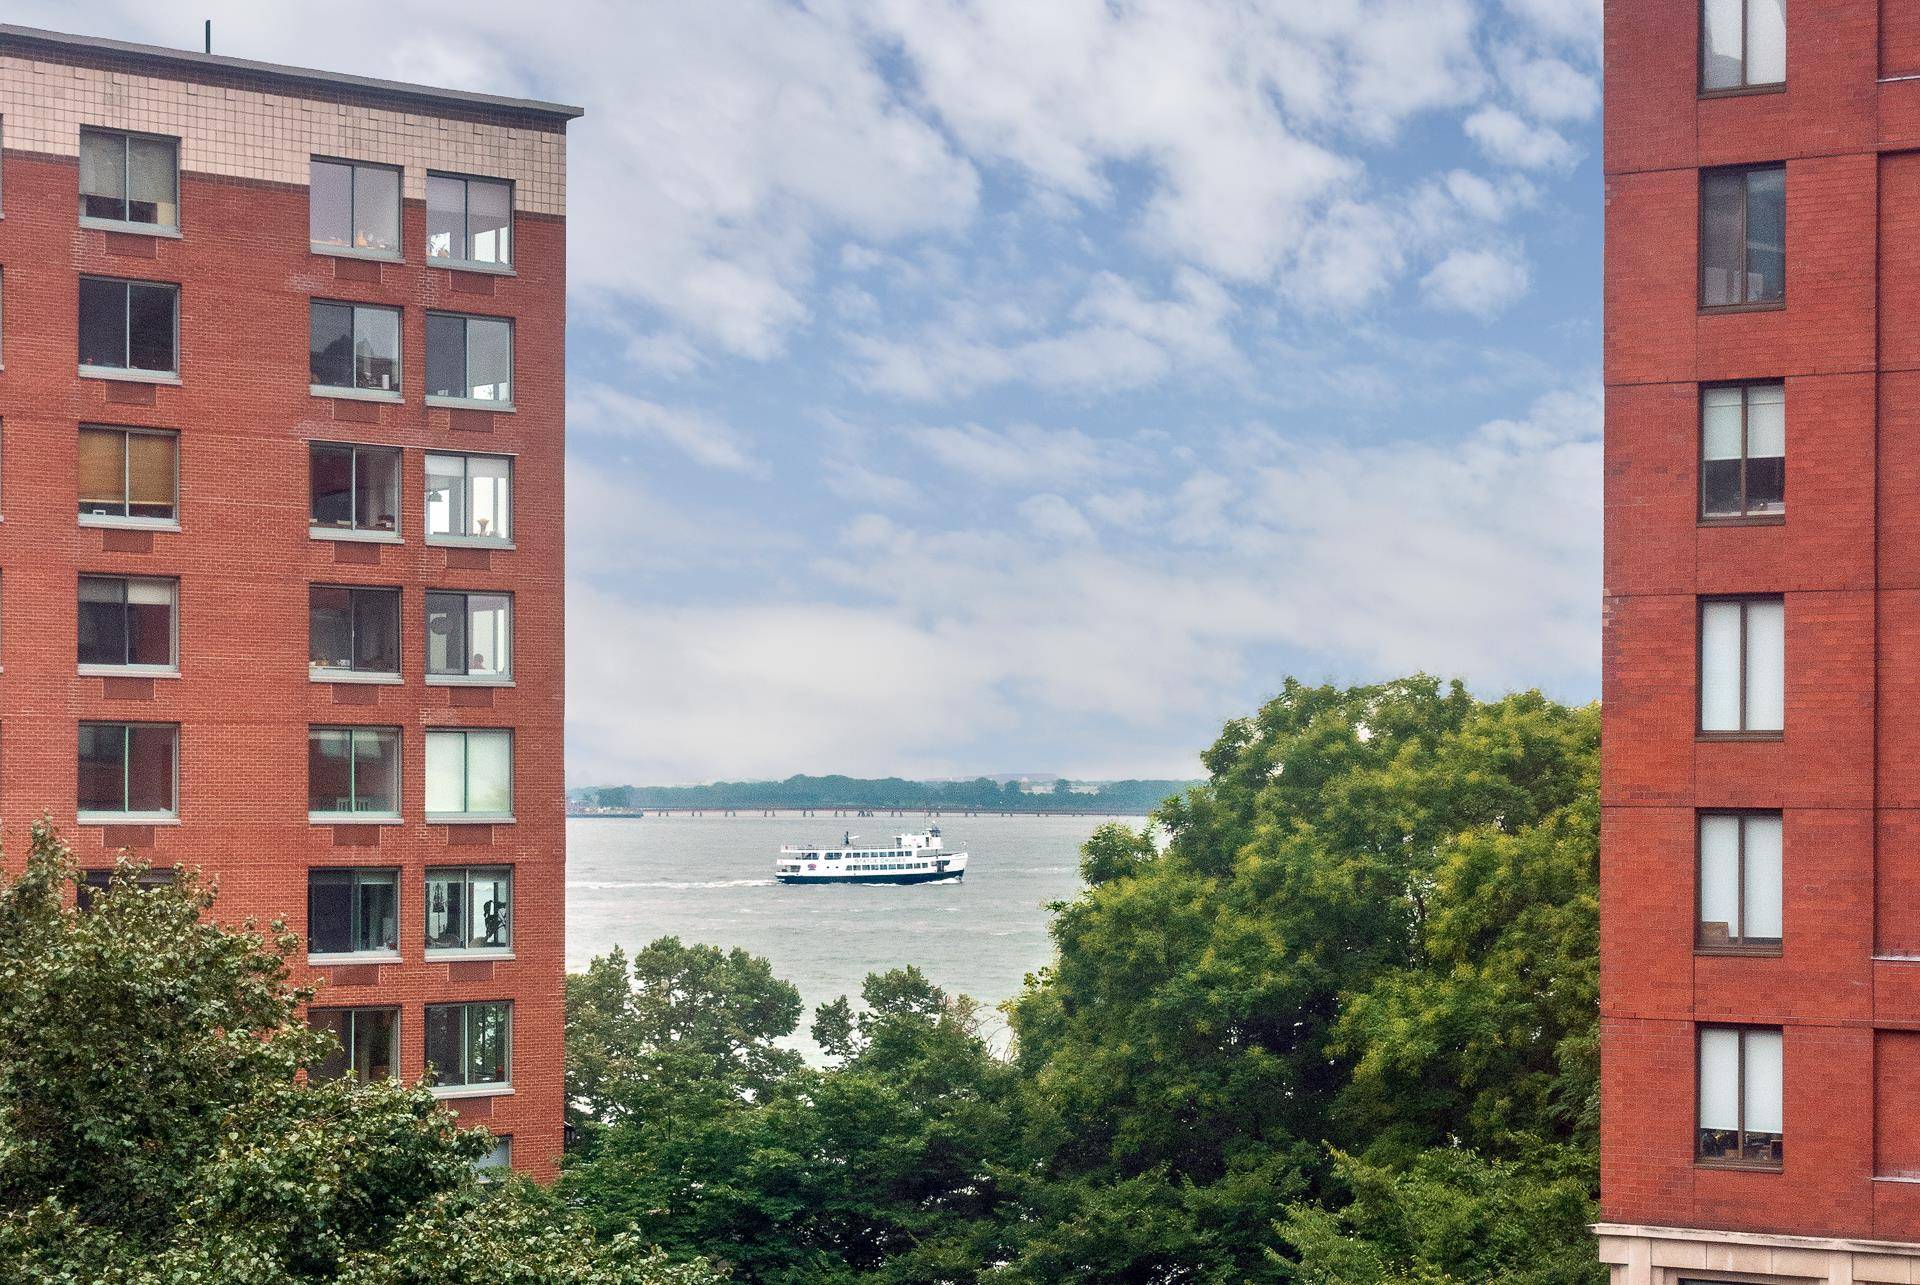 NO FEE ! Enjoy River views and the sunset from the windows of this renovated one bedroom apartment.